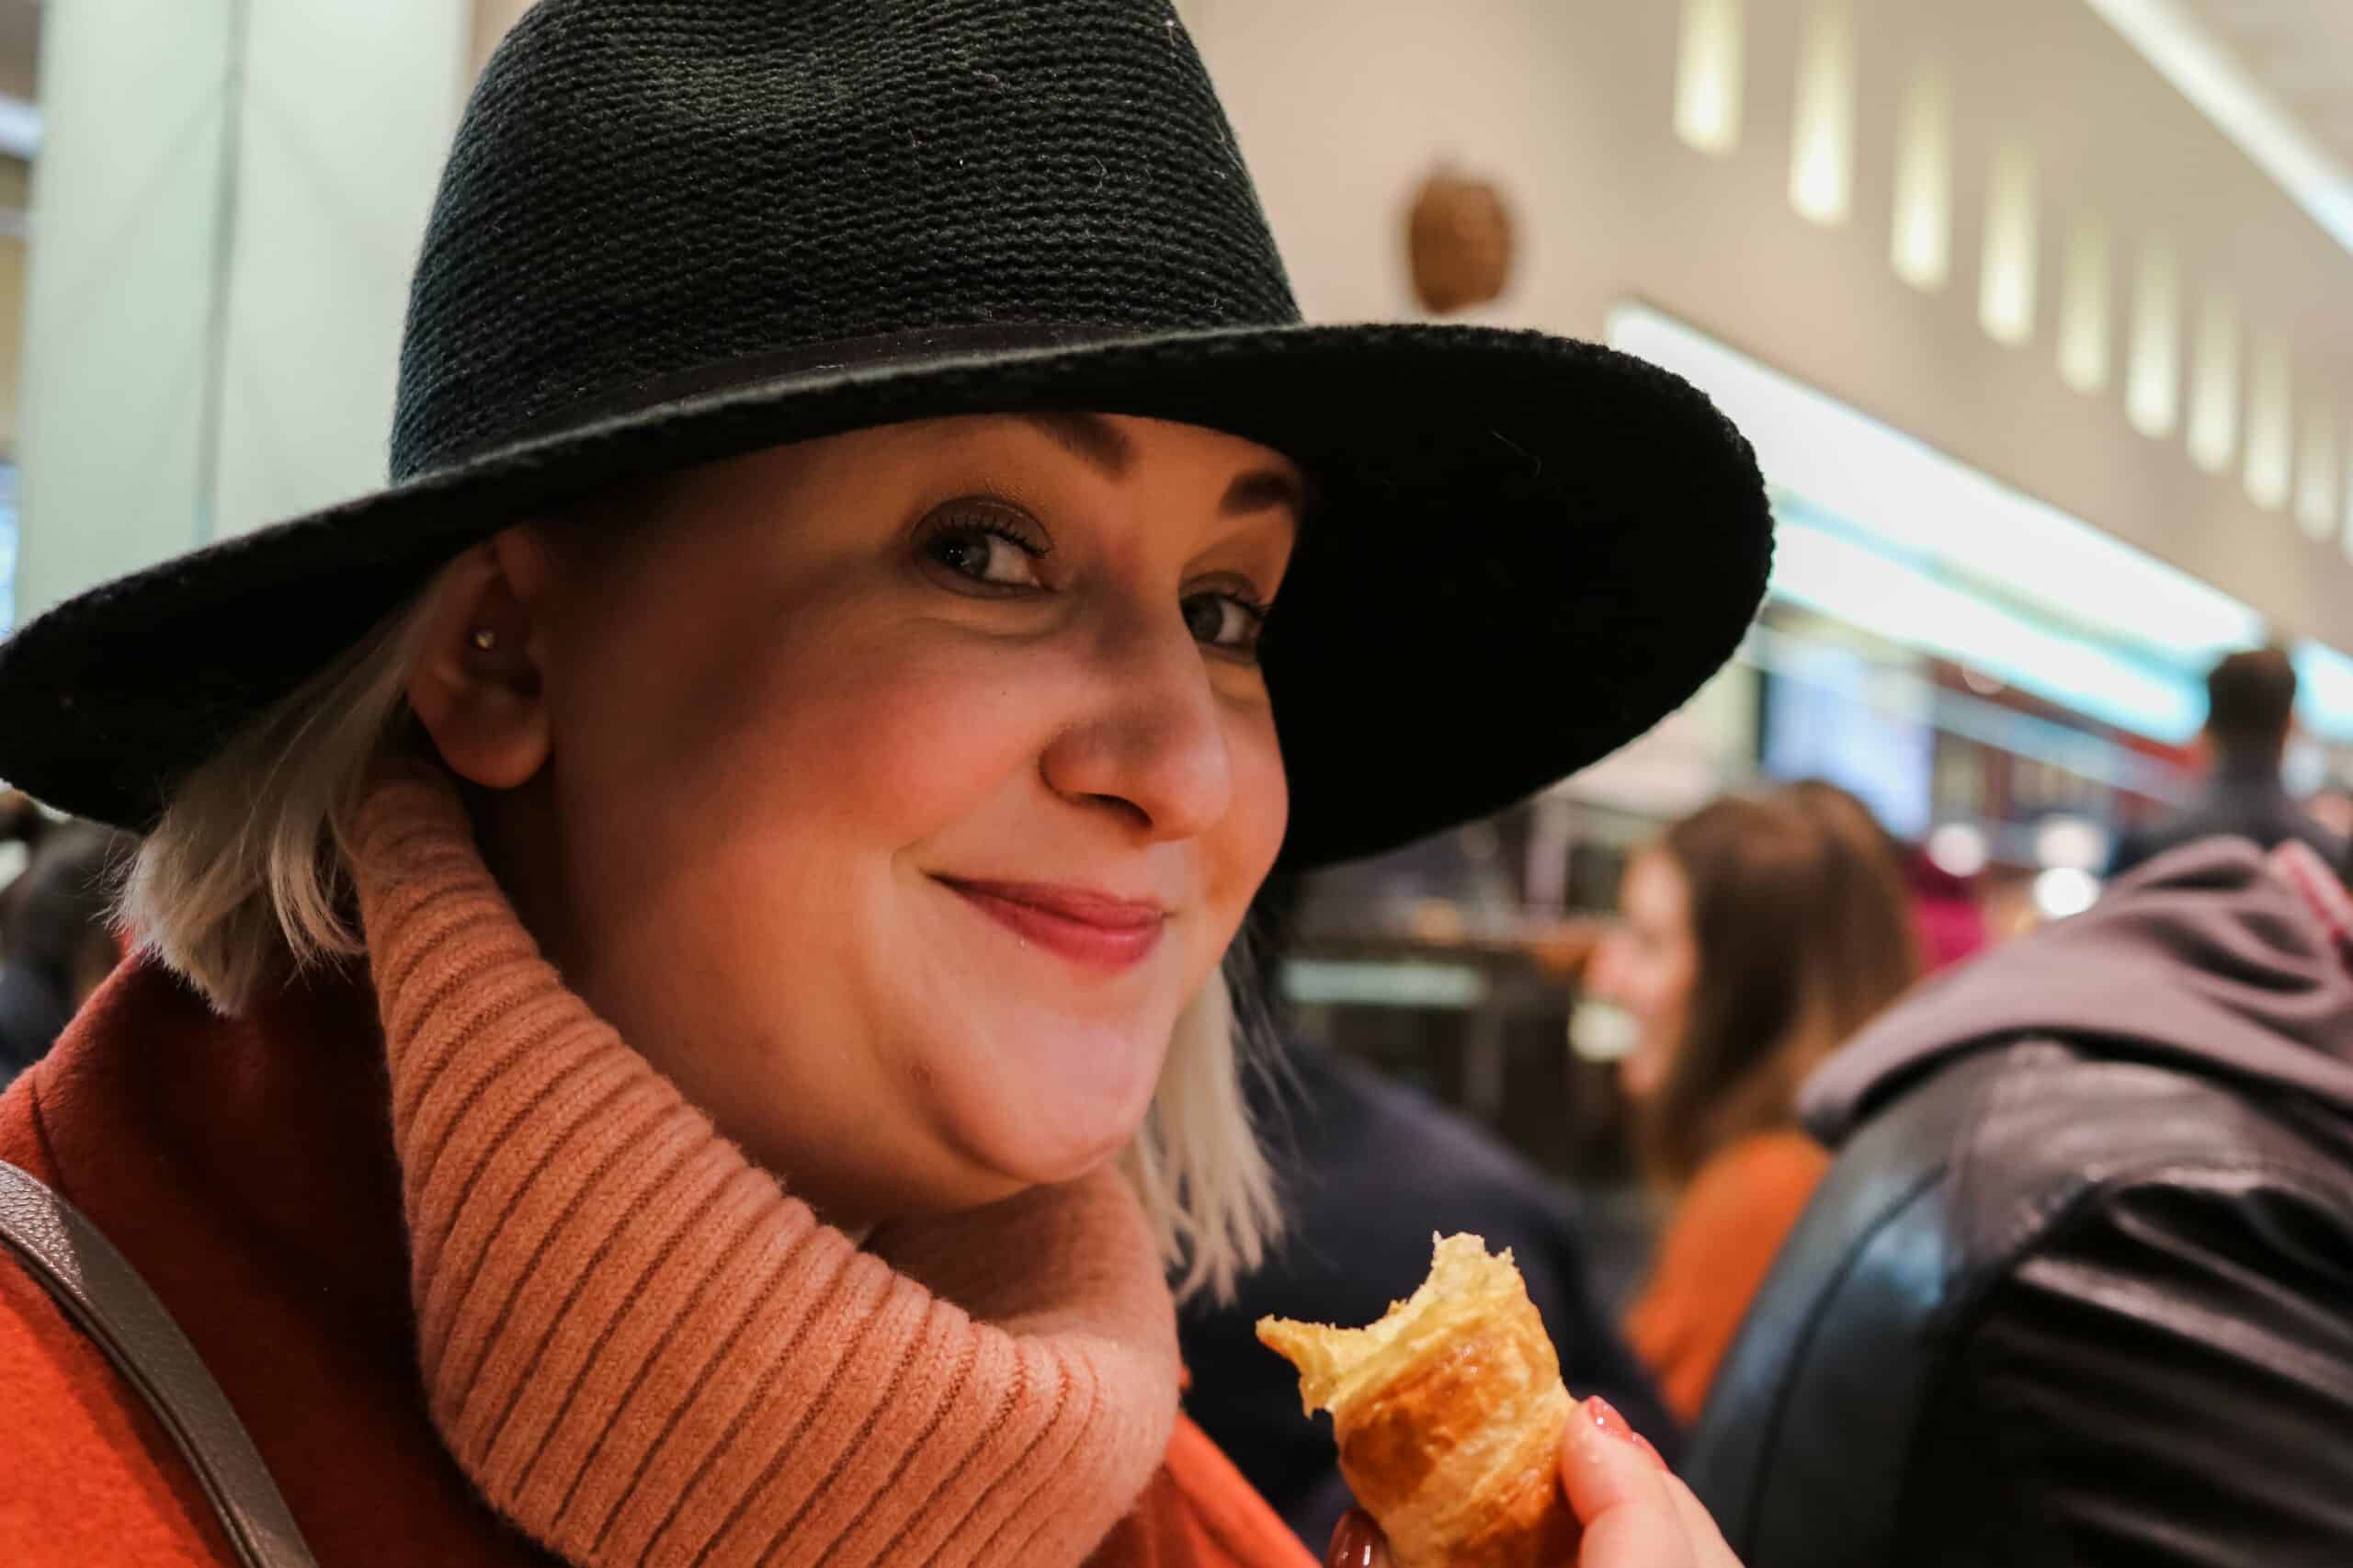 A woman smiles as she enjoys an Italian pastry in Milan